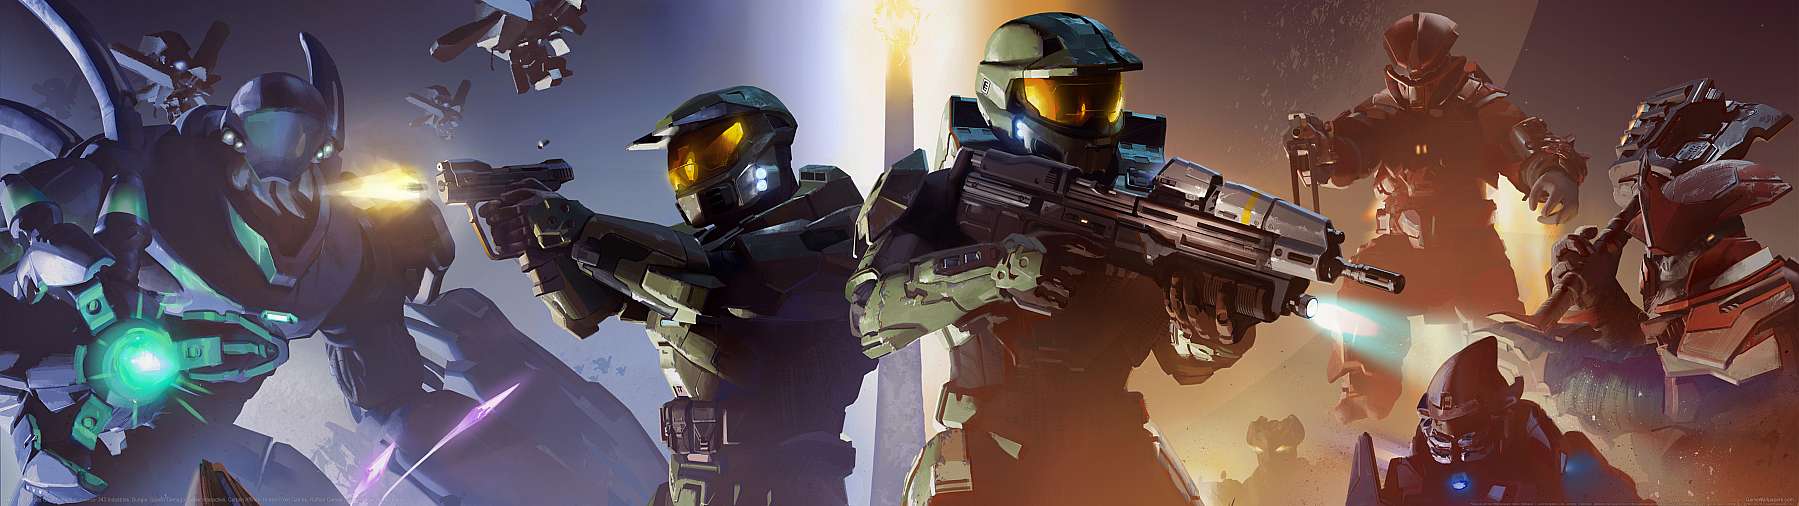 Halo: The Master Chief Collection wallpaper or background